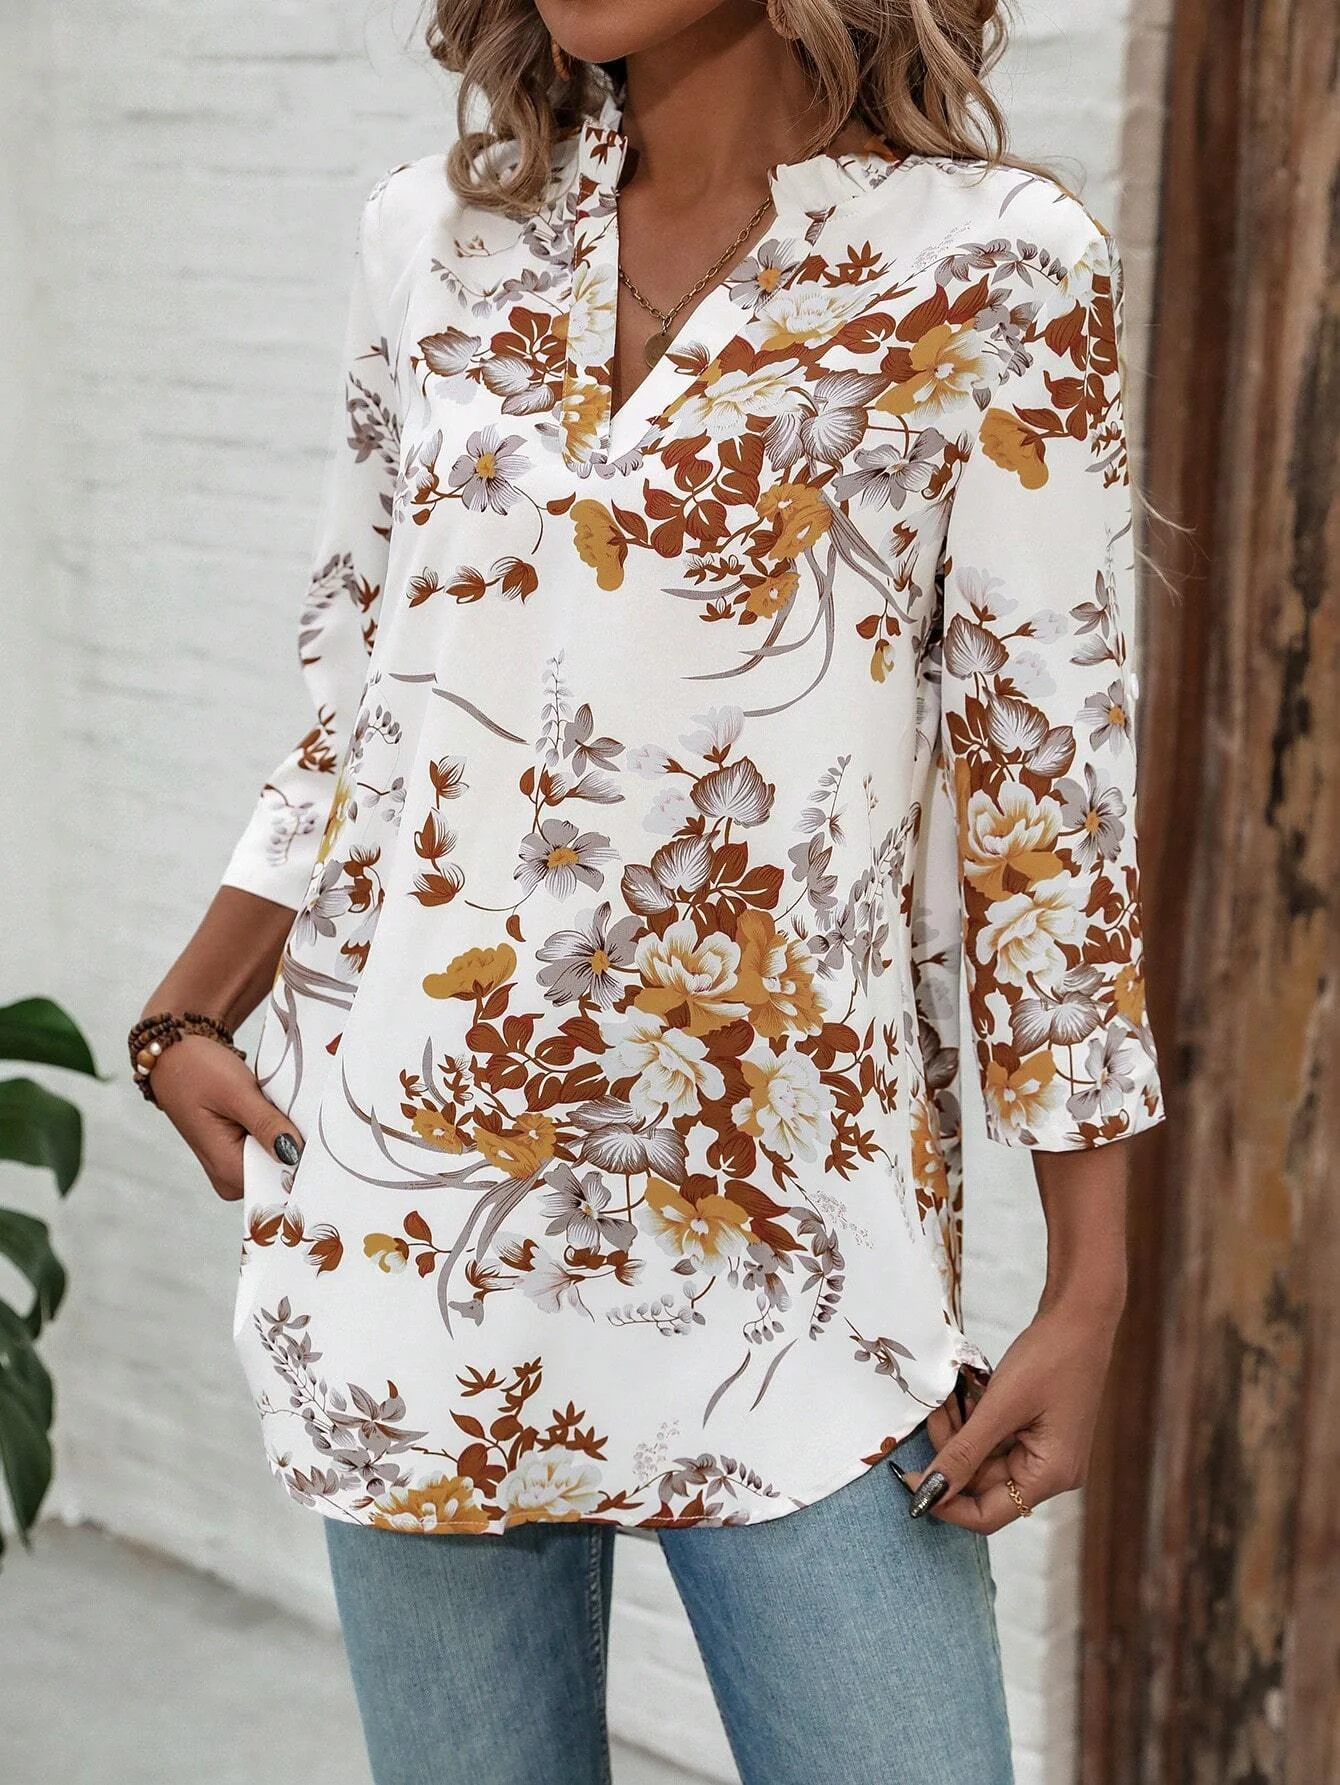 Women's Long Sleeve Blouse Summer White Floral V Neck Daily Going Out Casual Tunic Top